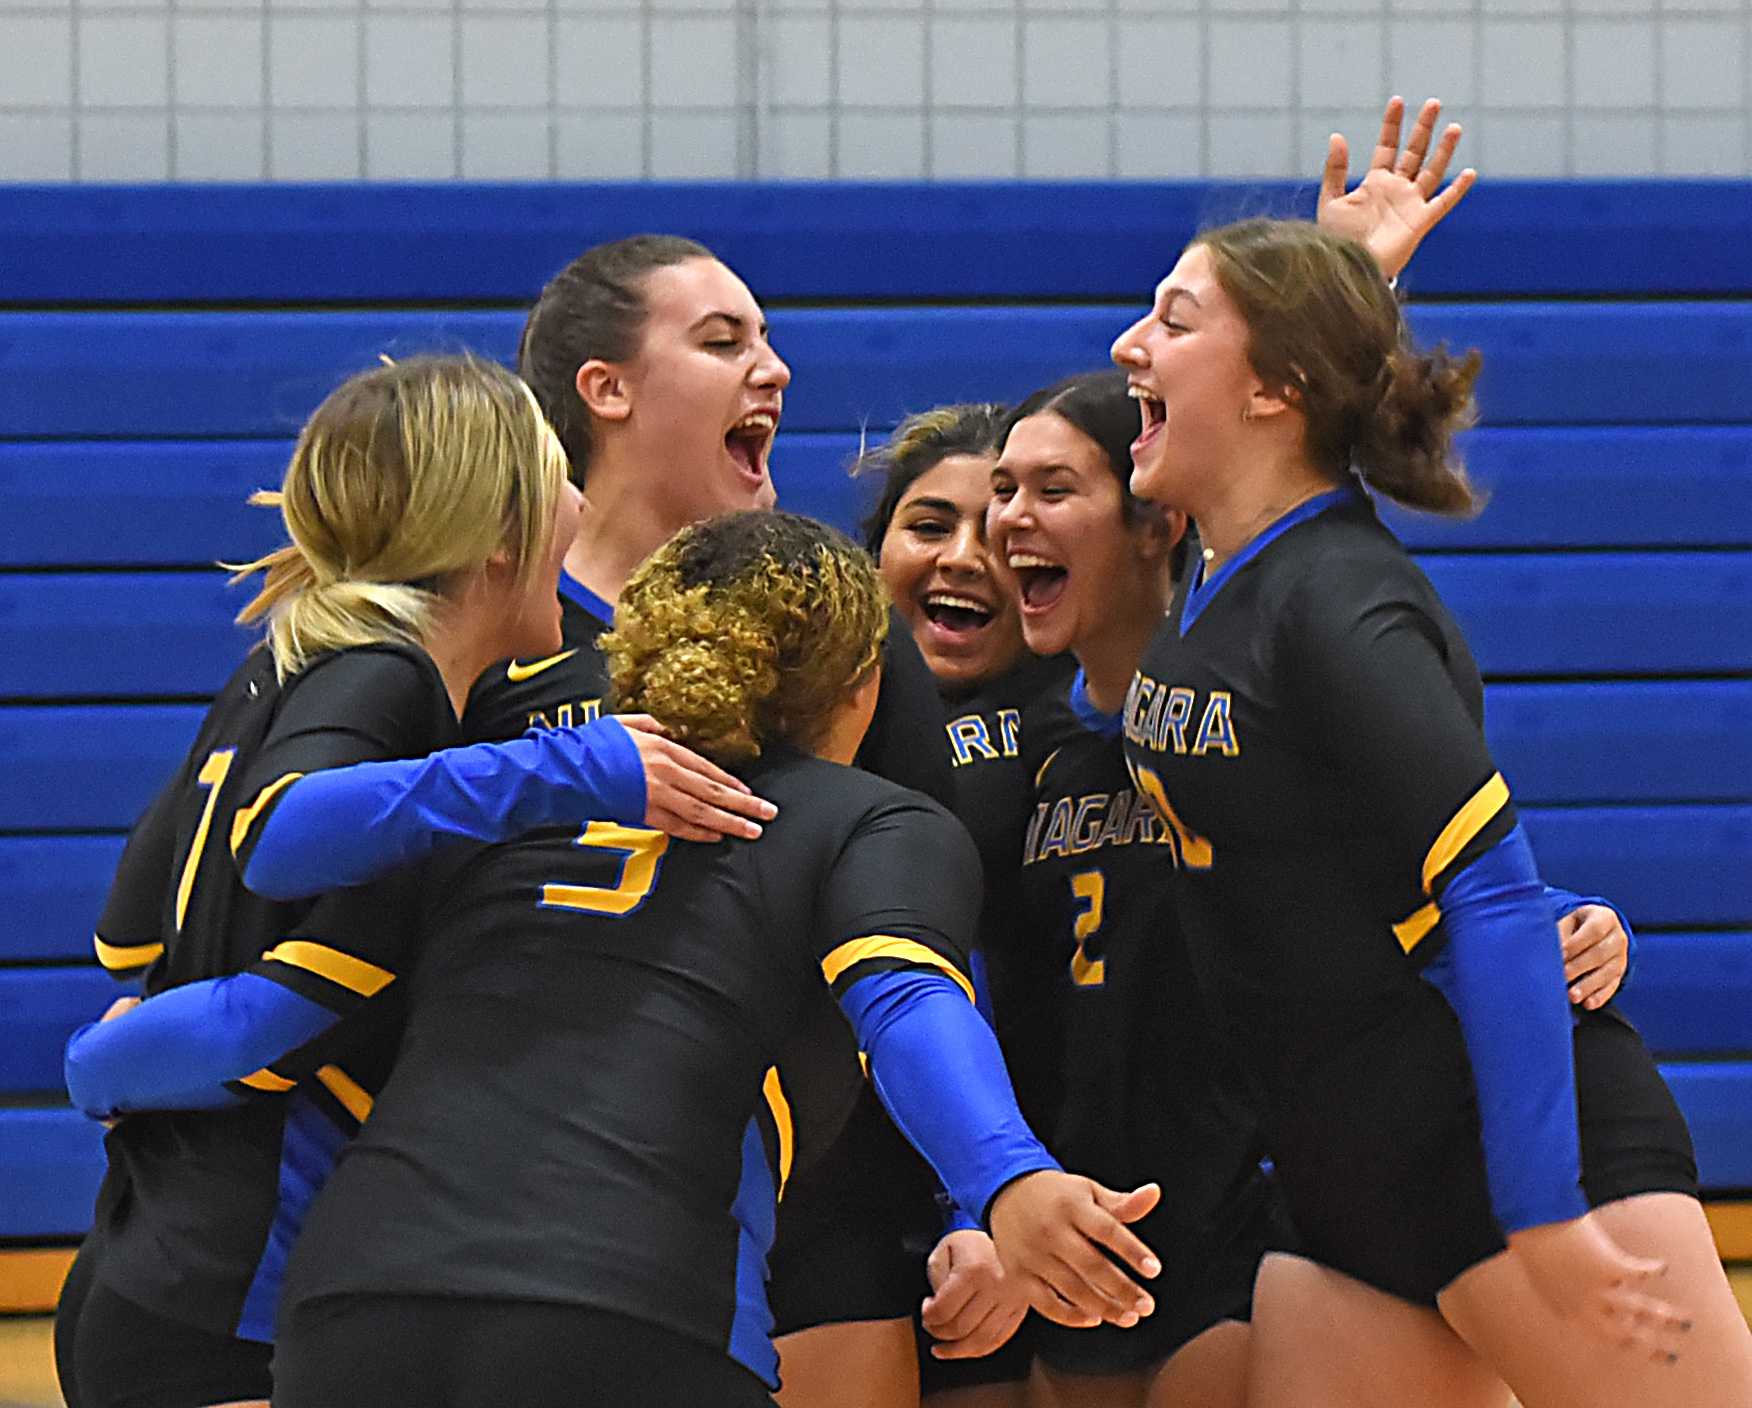 Spikers win conference opener